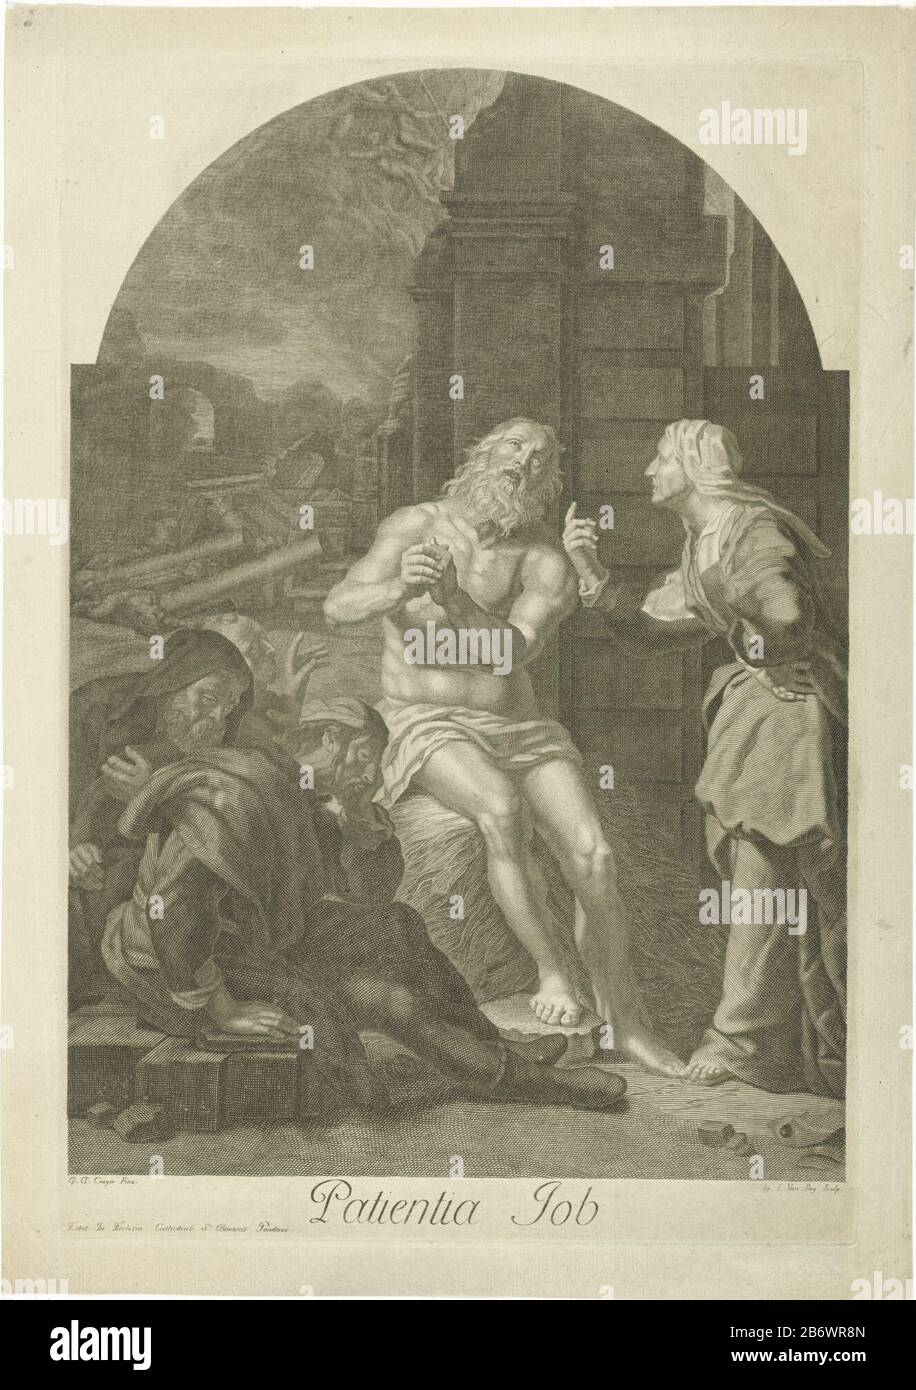 Job op de mesthoop Patienta Job (titel op object) At a ruin Job sitting on a dunghill. He is taunted by his wife, standing beside him. Links are three of his vrienden. Manufacturer : printmaker: Ignatius J. Roy (listed property) to painting: Gaspar de Crayer (listed property) Place manufacture: Southern Netherlands Date: 1594 - 1729 Physical features: car material: paper Technique: engra (printing process) Dimensions: plate edge: h 464 mm × W 315 mm Subject: Job on the dunghill (Job 2: 7-13) Stock Photo